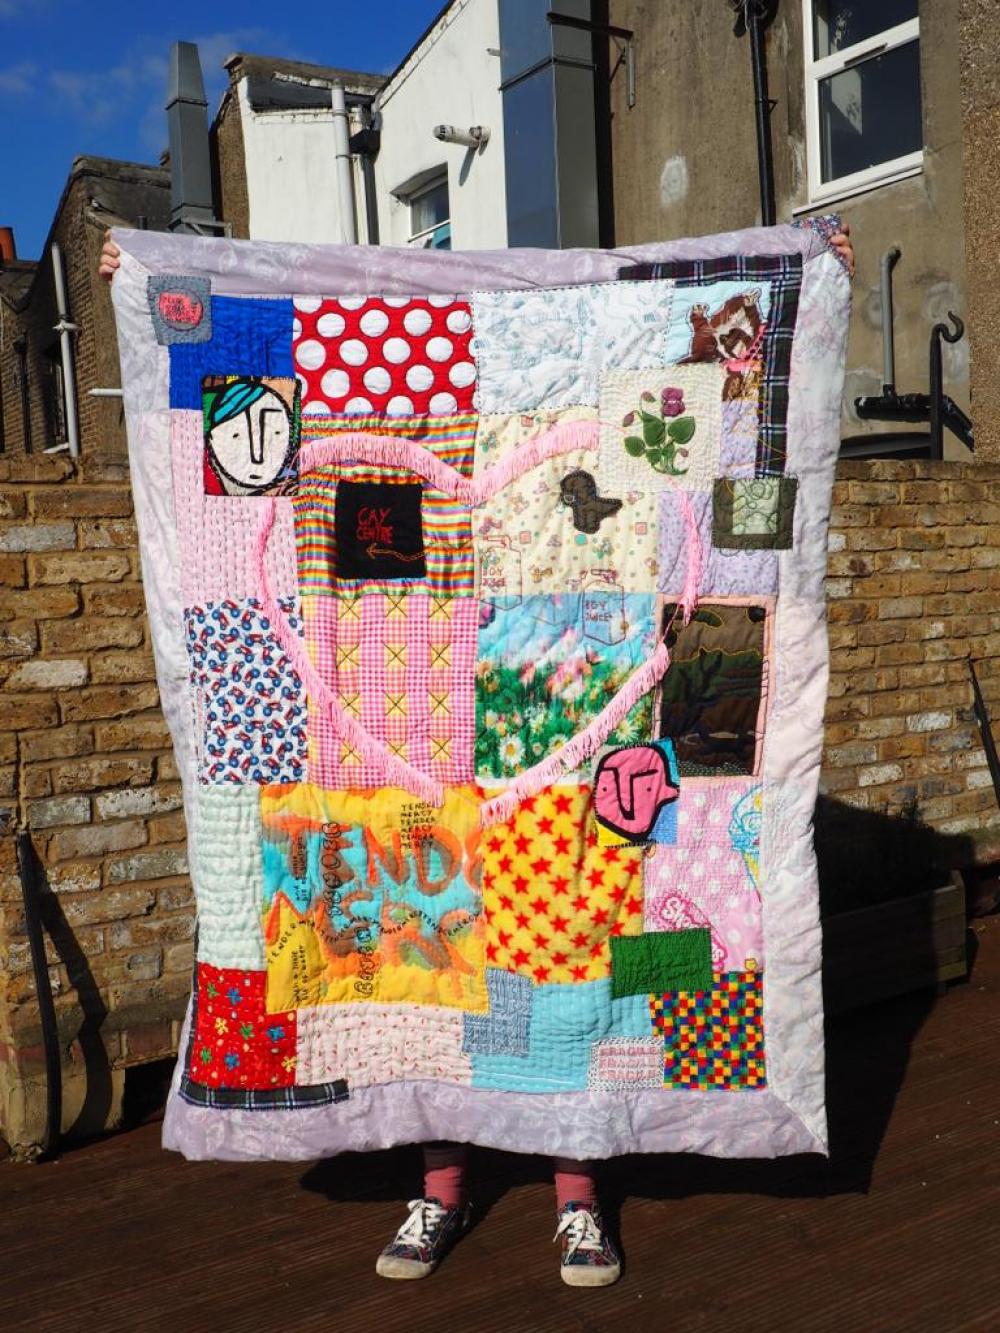 Colourful quilt artwork held up with blue sky and houses in the background.